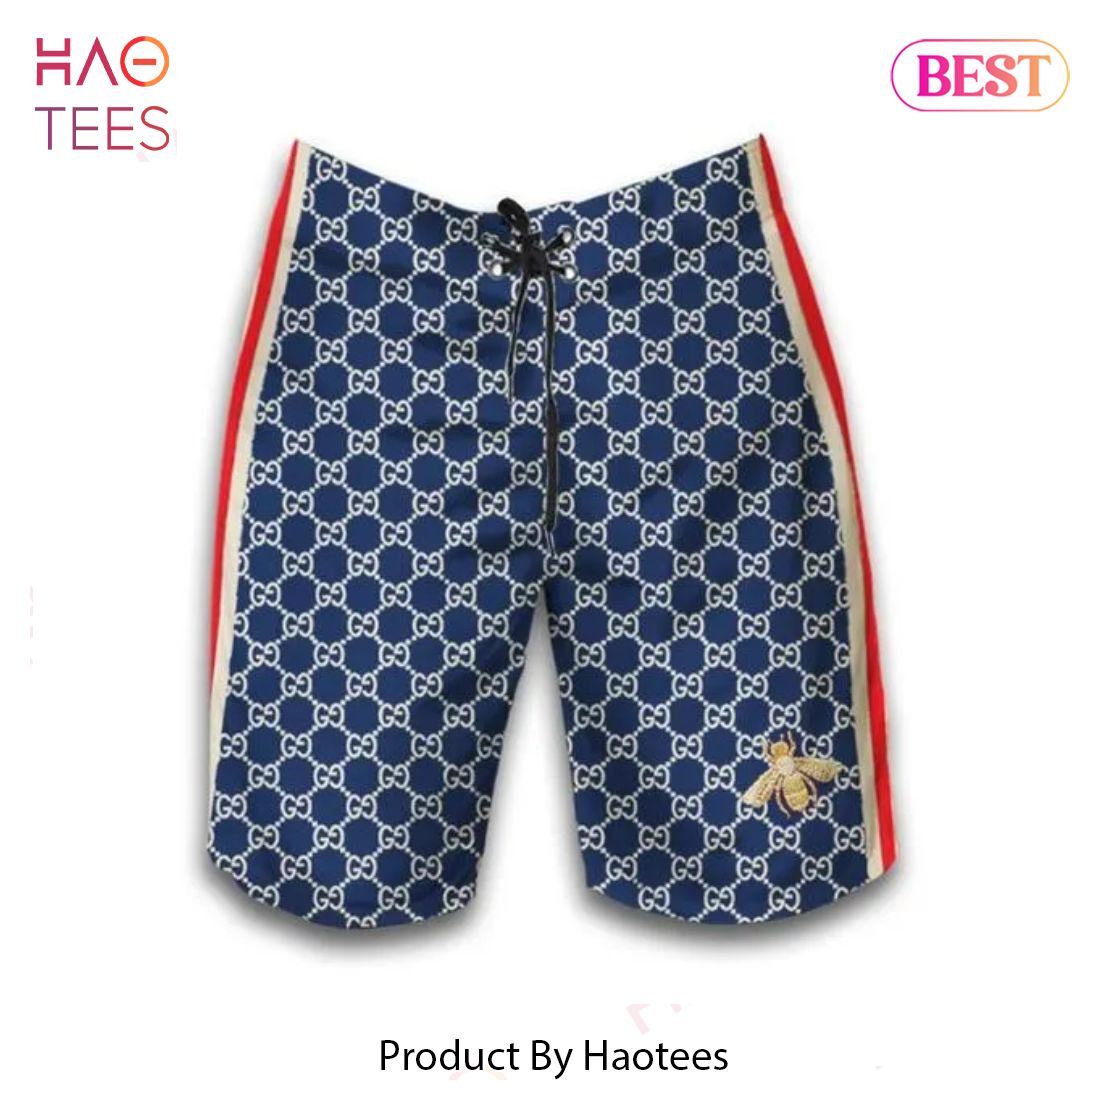 NEW FASHION] Gucci New Hot Luxury Brand All Over Print Shorts Pants For Men